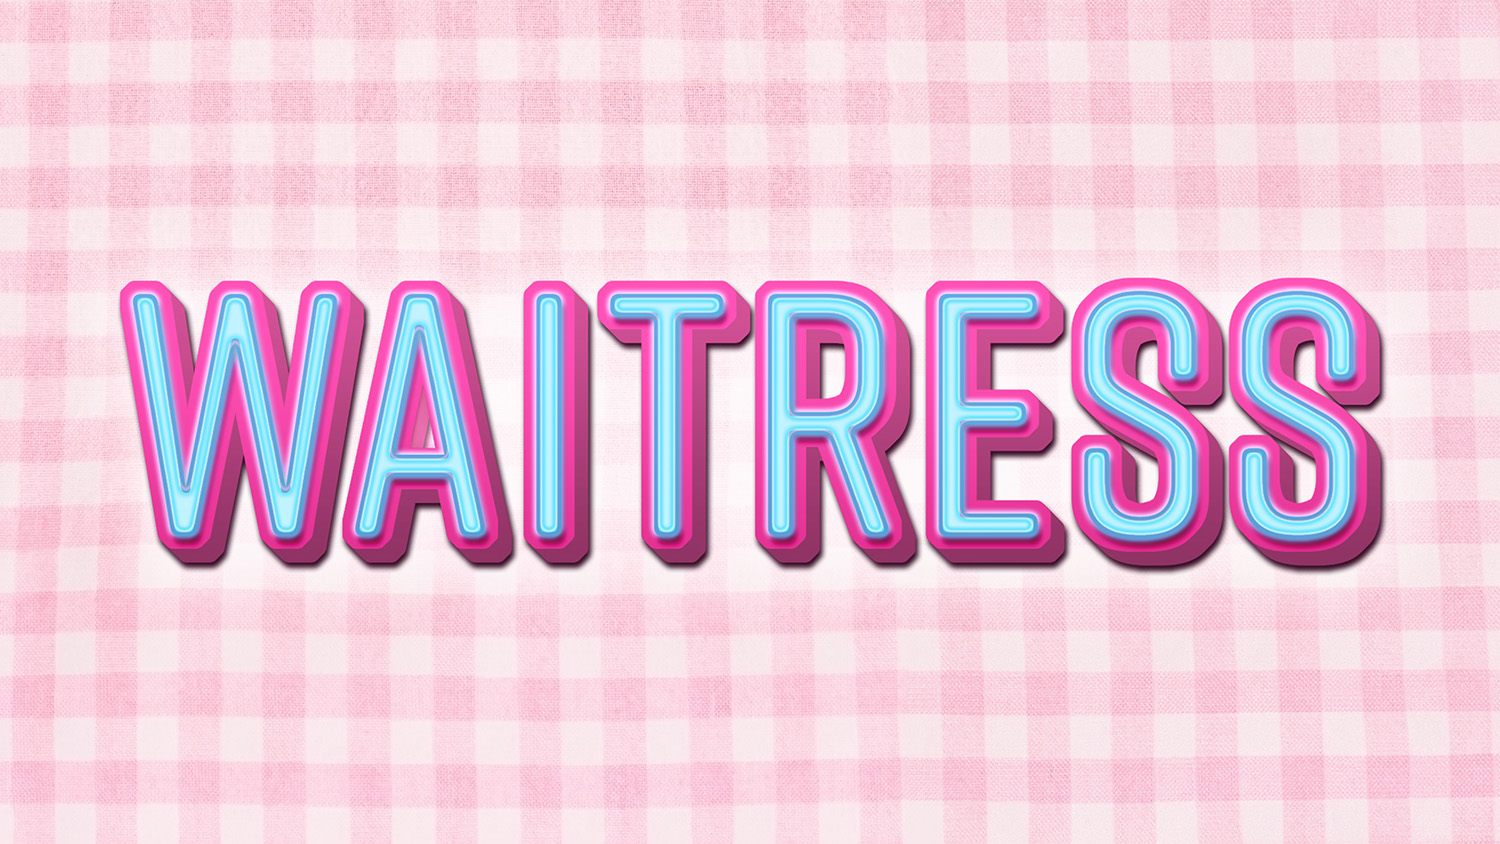 Logo for Waitress. The title, in a restaurant's neon sign glowing font, hangs in front of a pink plaid tablecloth, like a 50s diner.